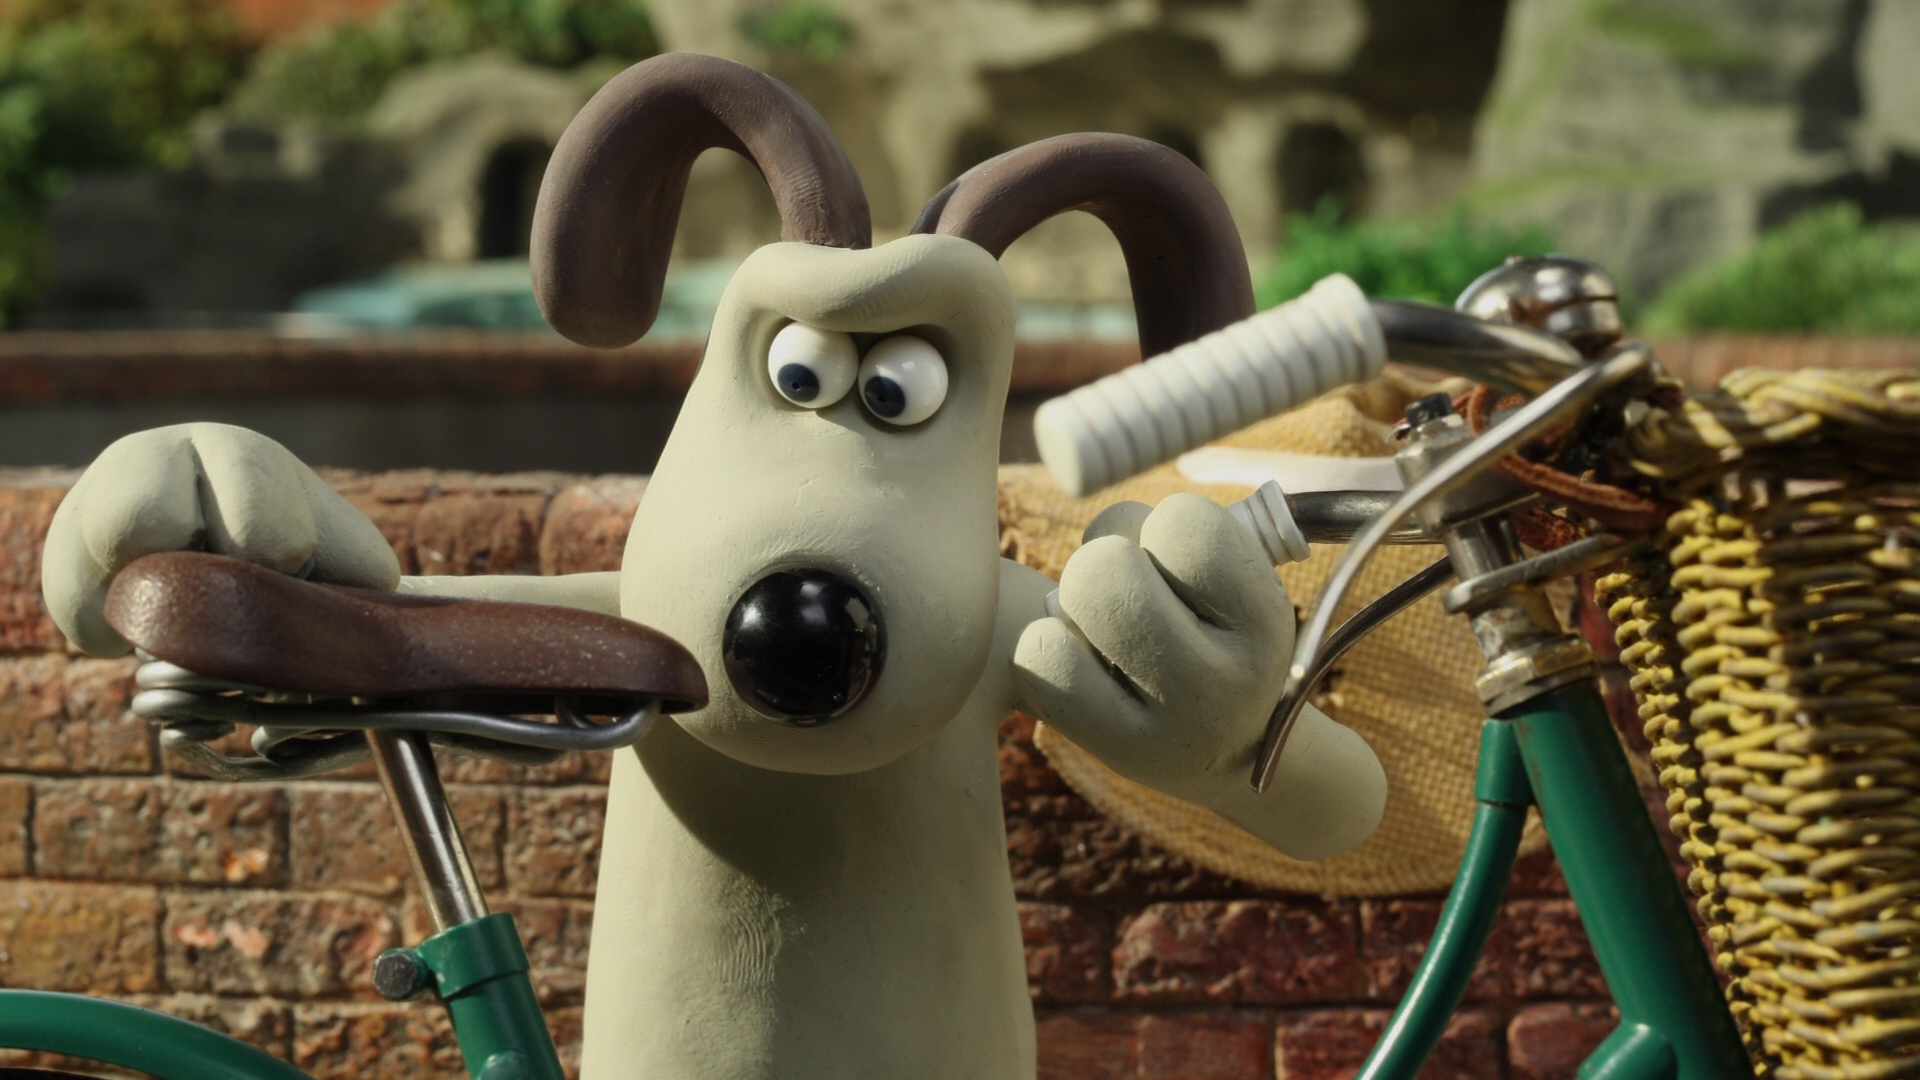 1920x1080 Wallace and Gromit A Matter of Loaf and Death movie rq wallpaper | | 171682